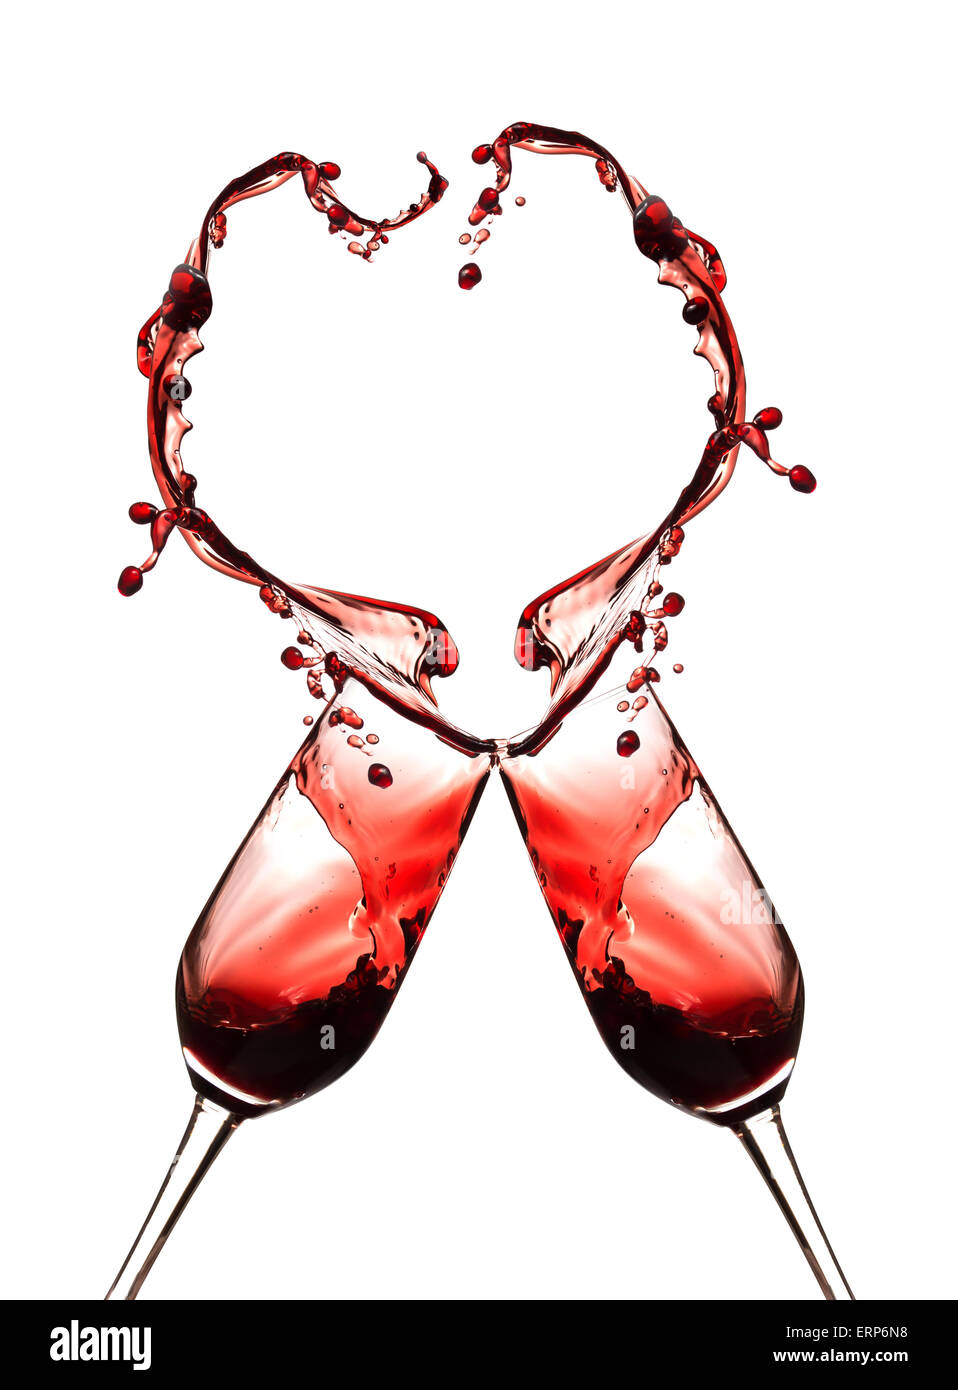 Abstract heart from red wine splashing. Stock Photo